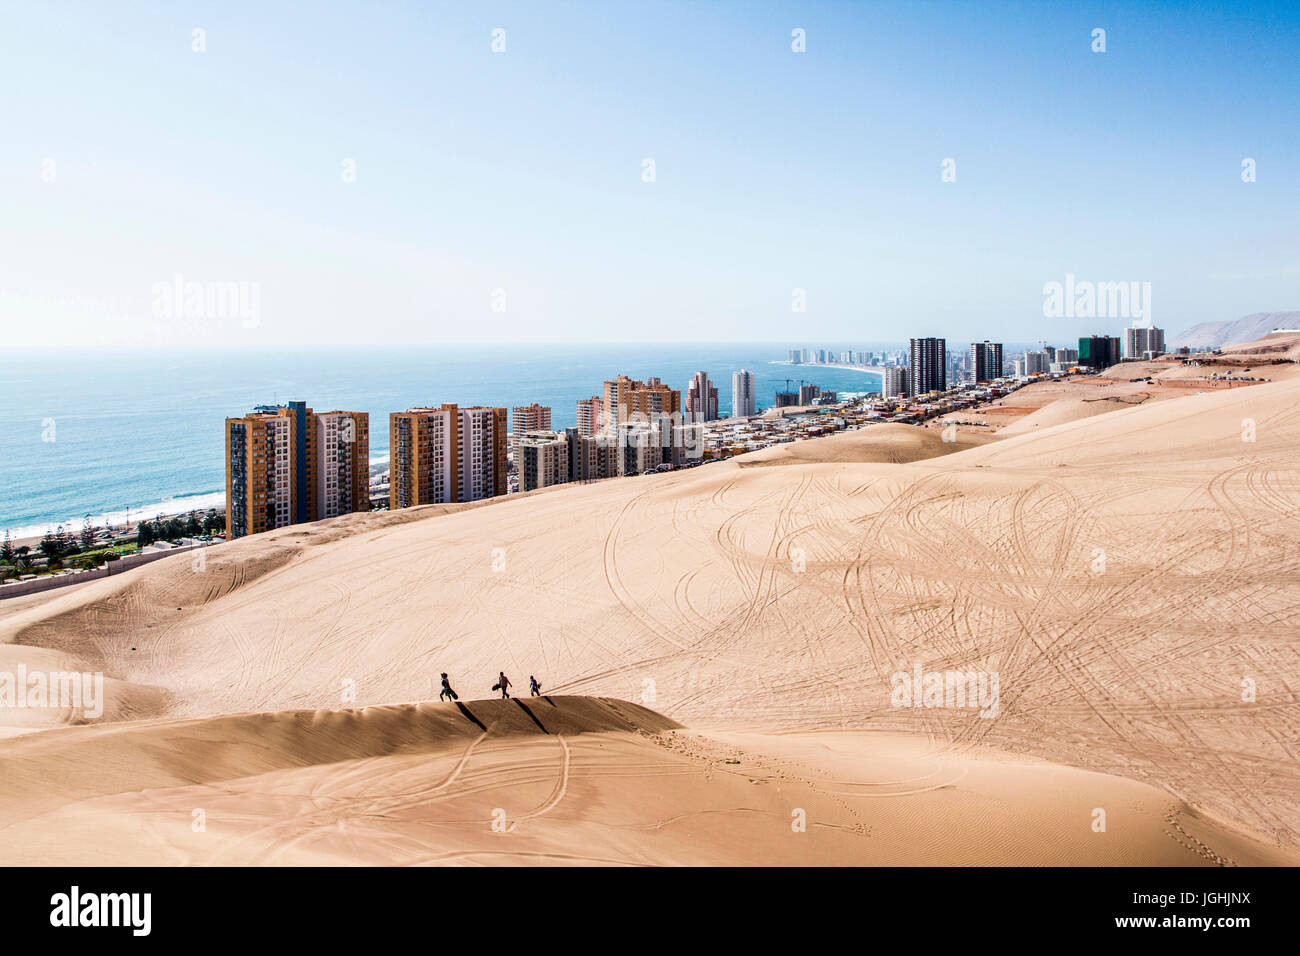 Iquique viewed from Cerro Dragon, a sand dune located next to the city. Iquique, Tarapaca Region, Chile. 15.11.15 Stock Photo